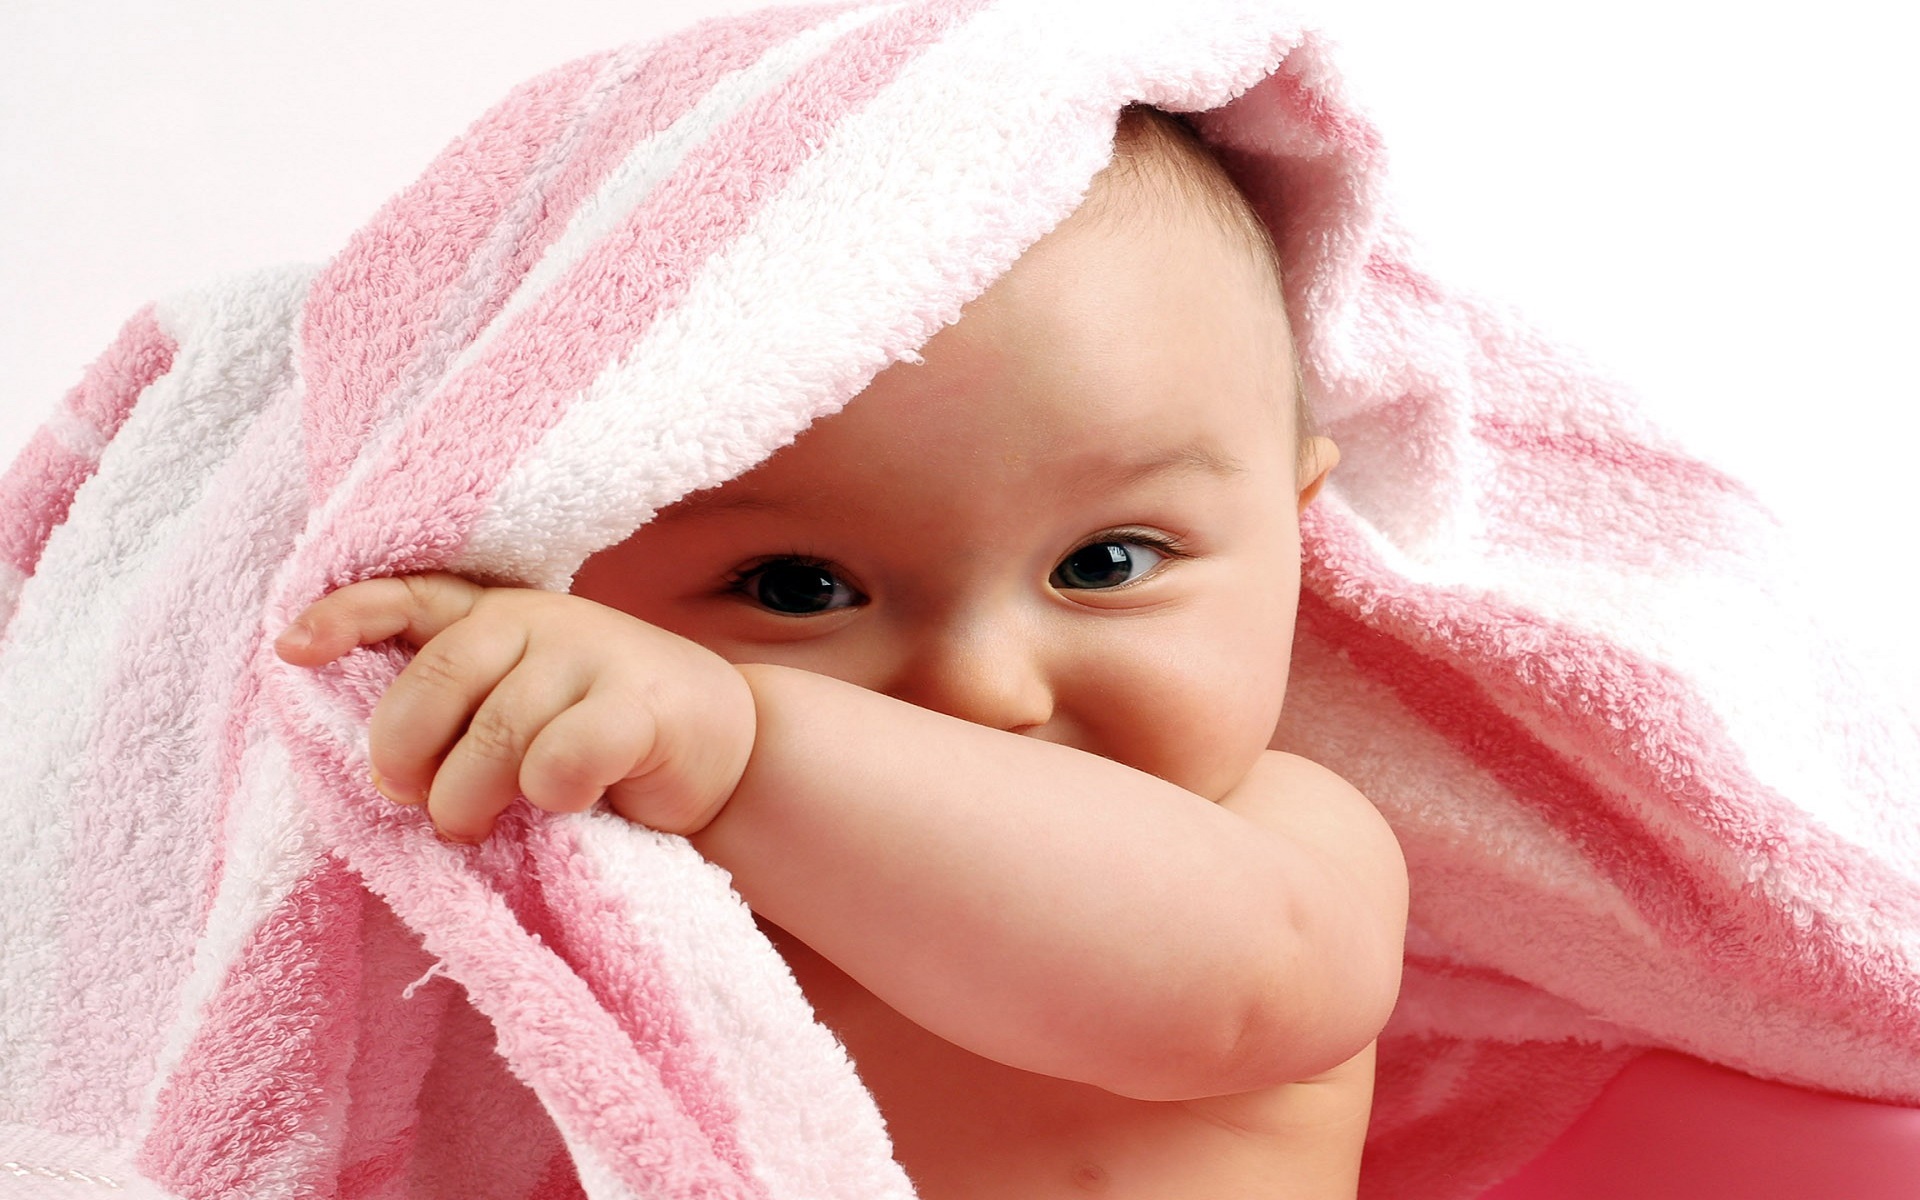 Blue Eyes Cute Child Baby Is Covering With White Towel In White Background  HD Cute Wallpapers  HD Wallpapers  ID 78356